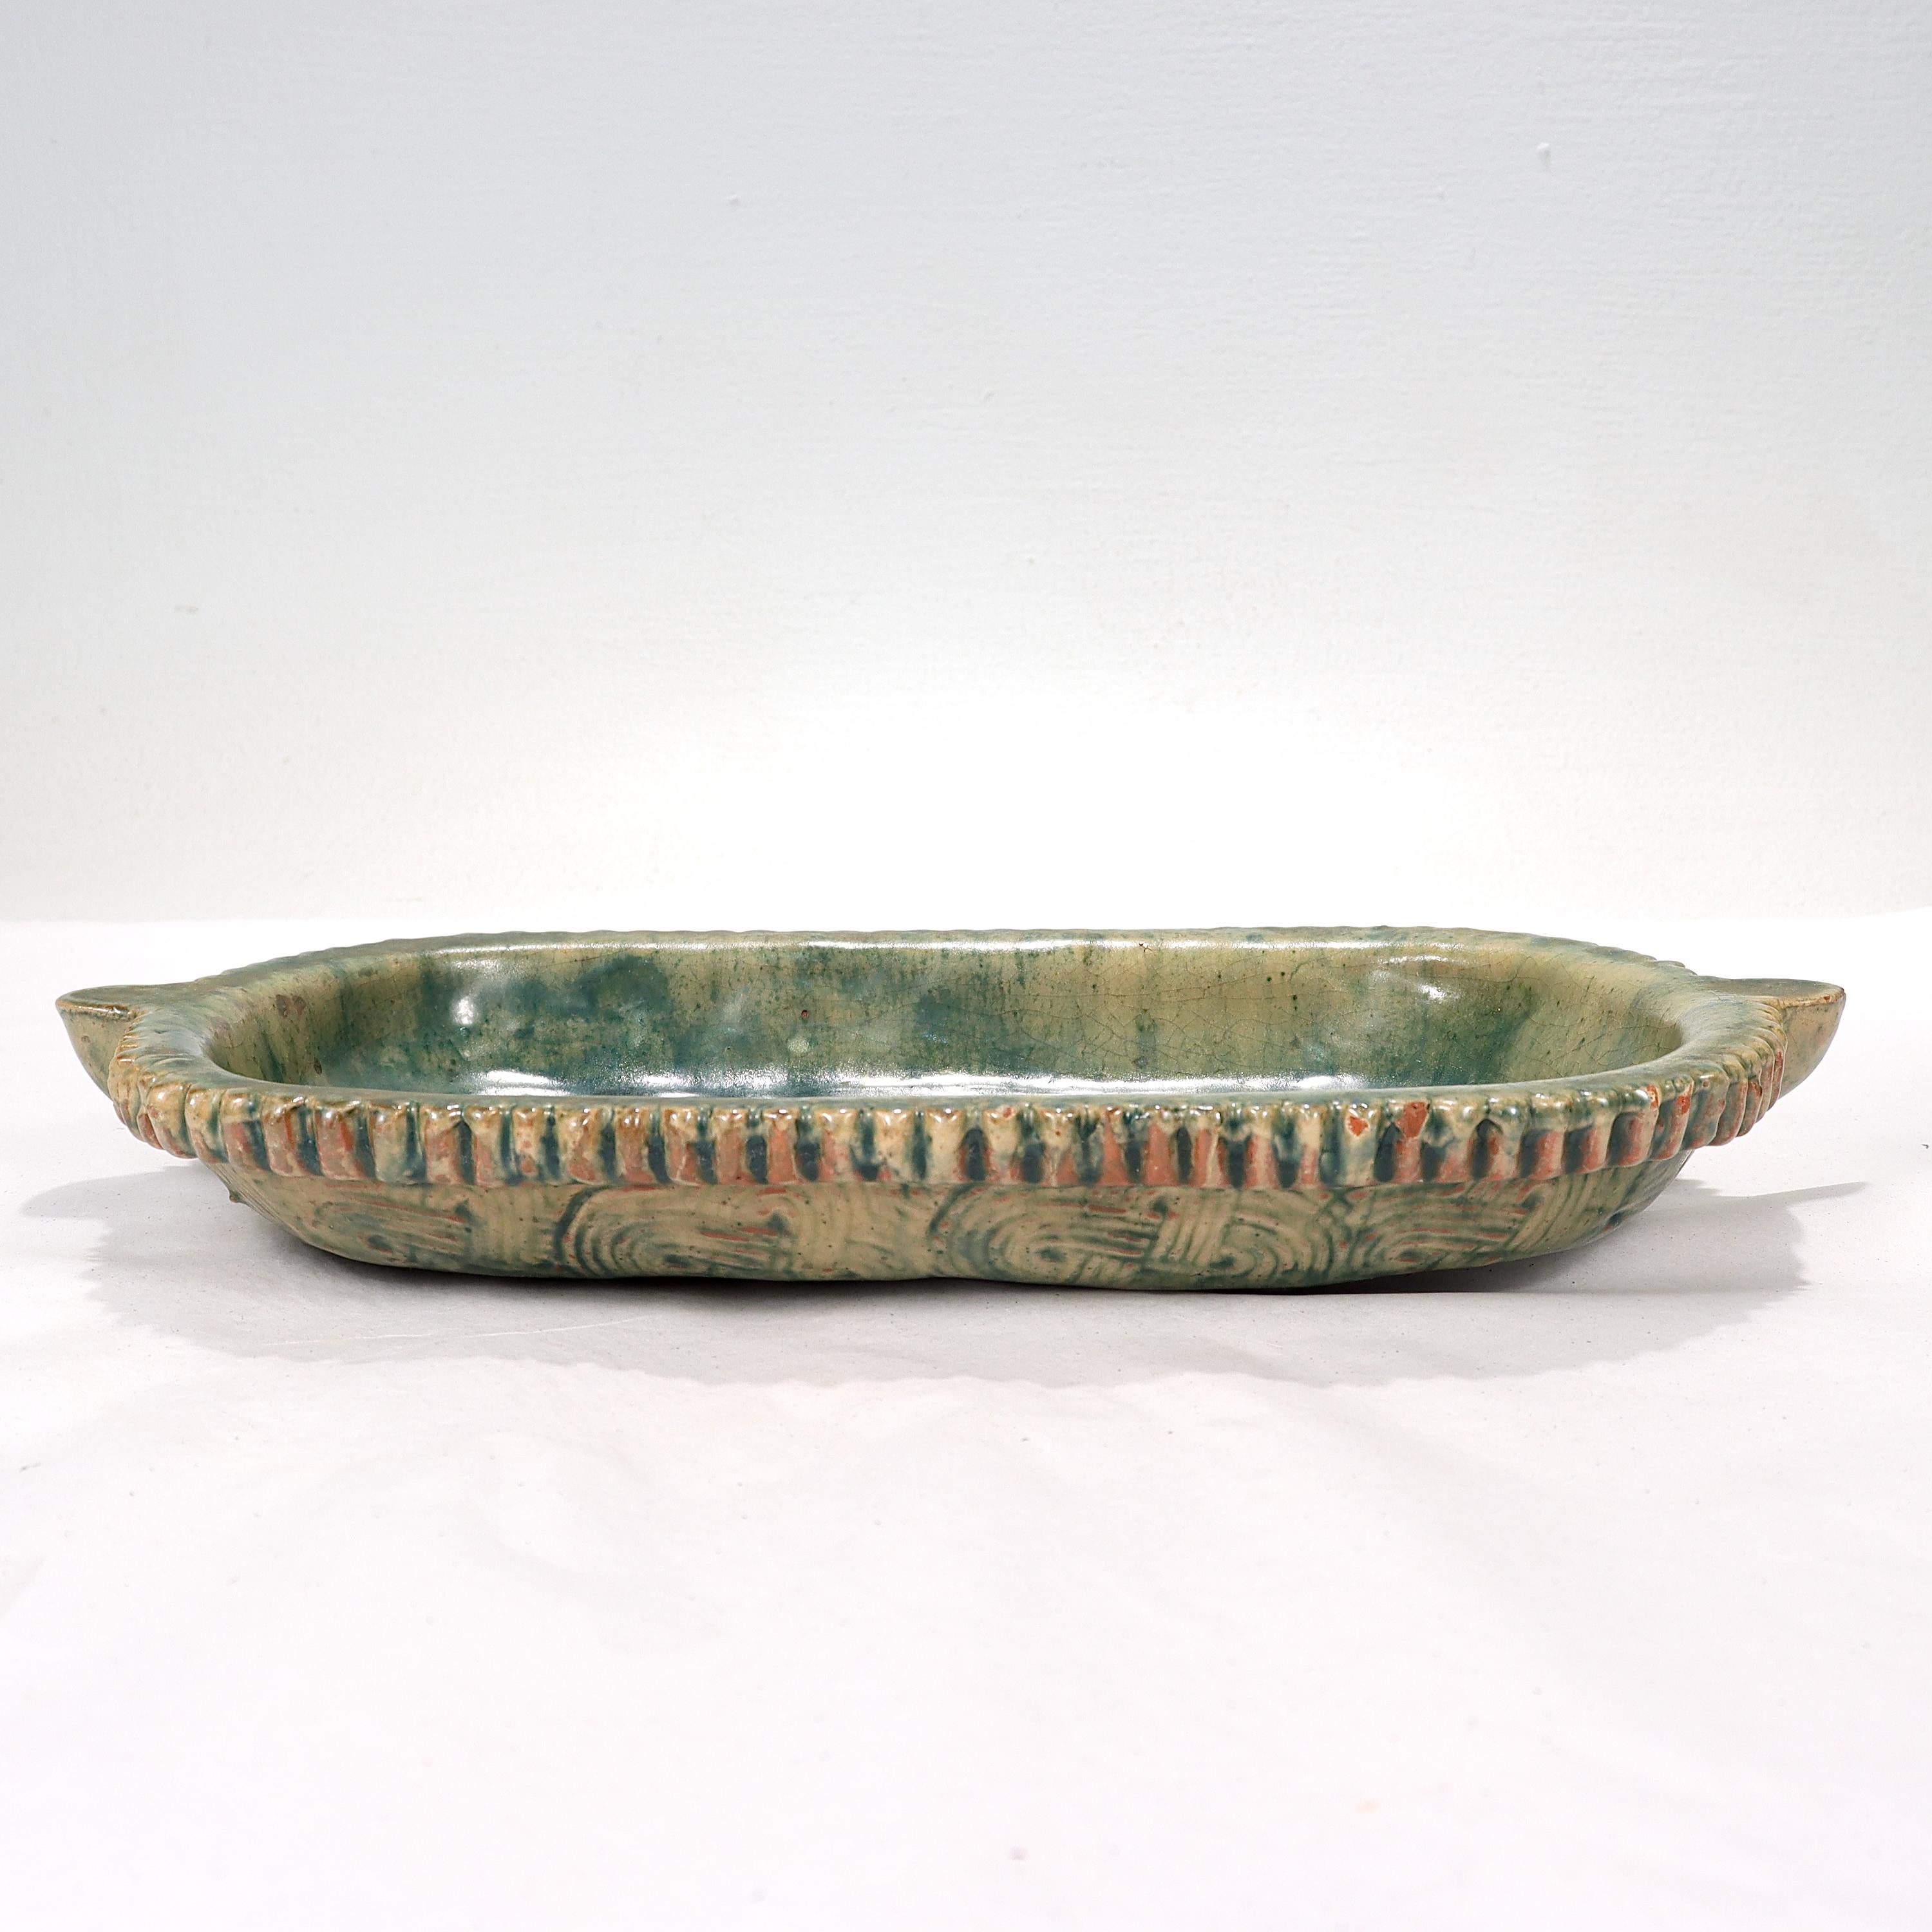 American Rare Moravian Pottery Works / Mercer Tile Company Low Bowl or Oblong Plate For Sale